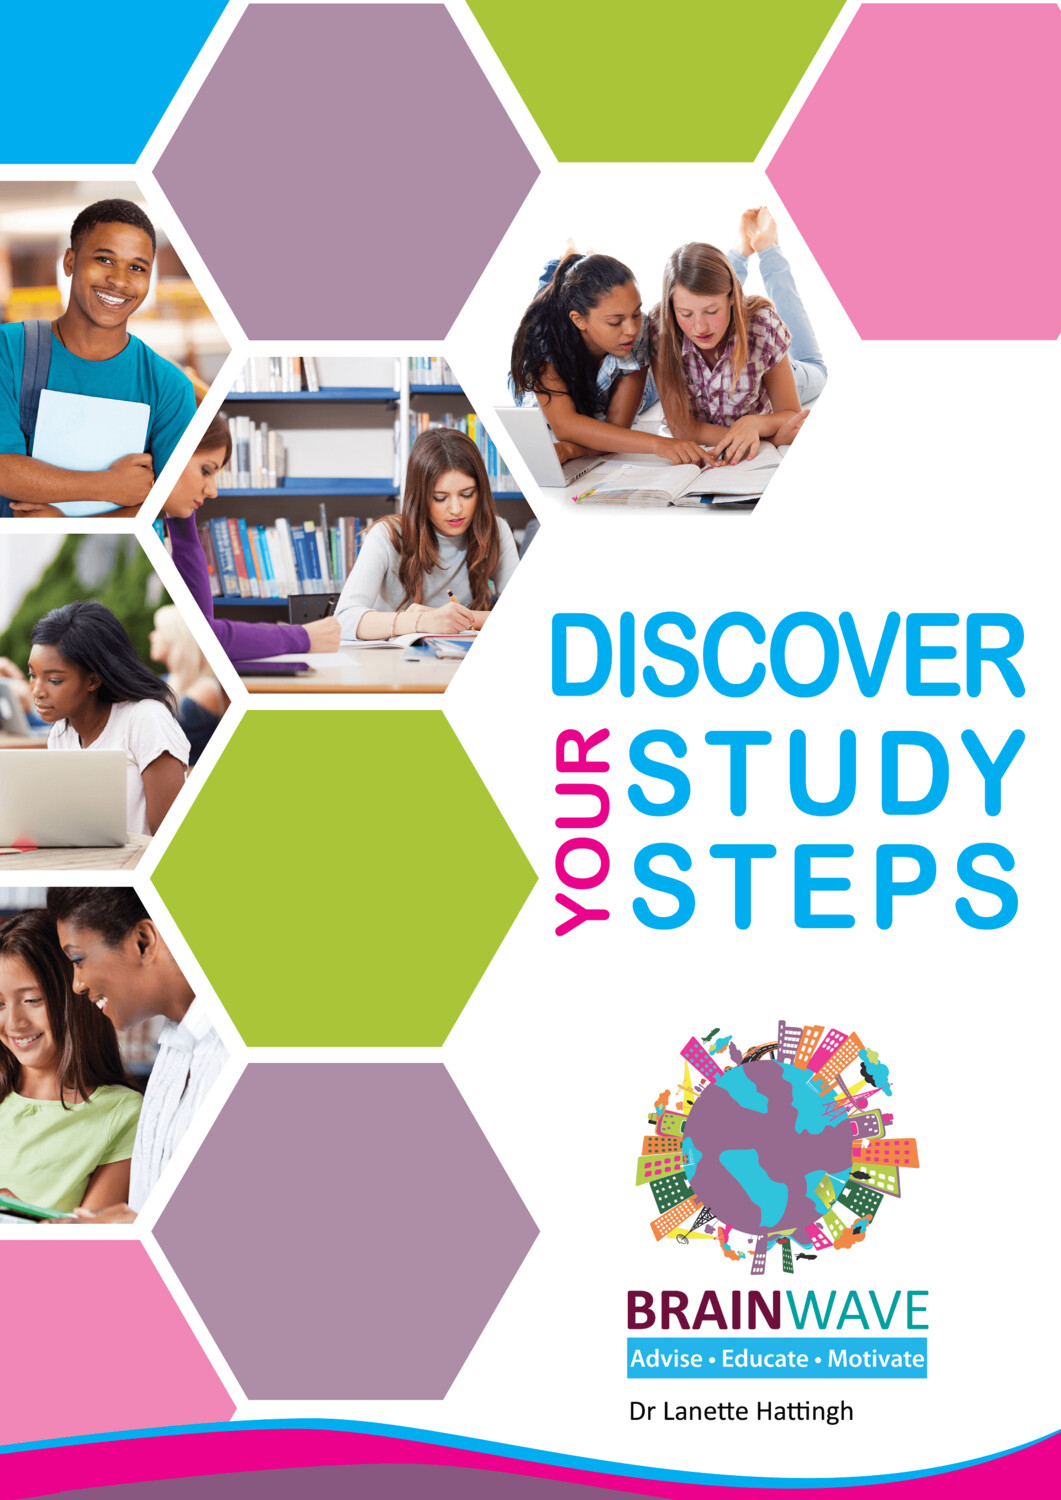 Discover your Study Steps - Brain Wave